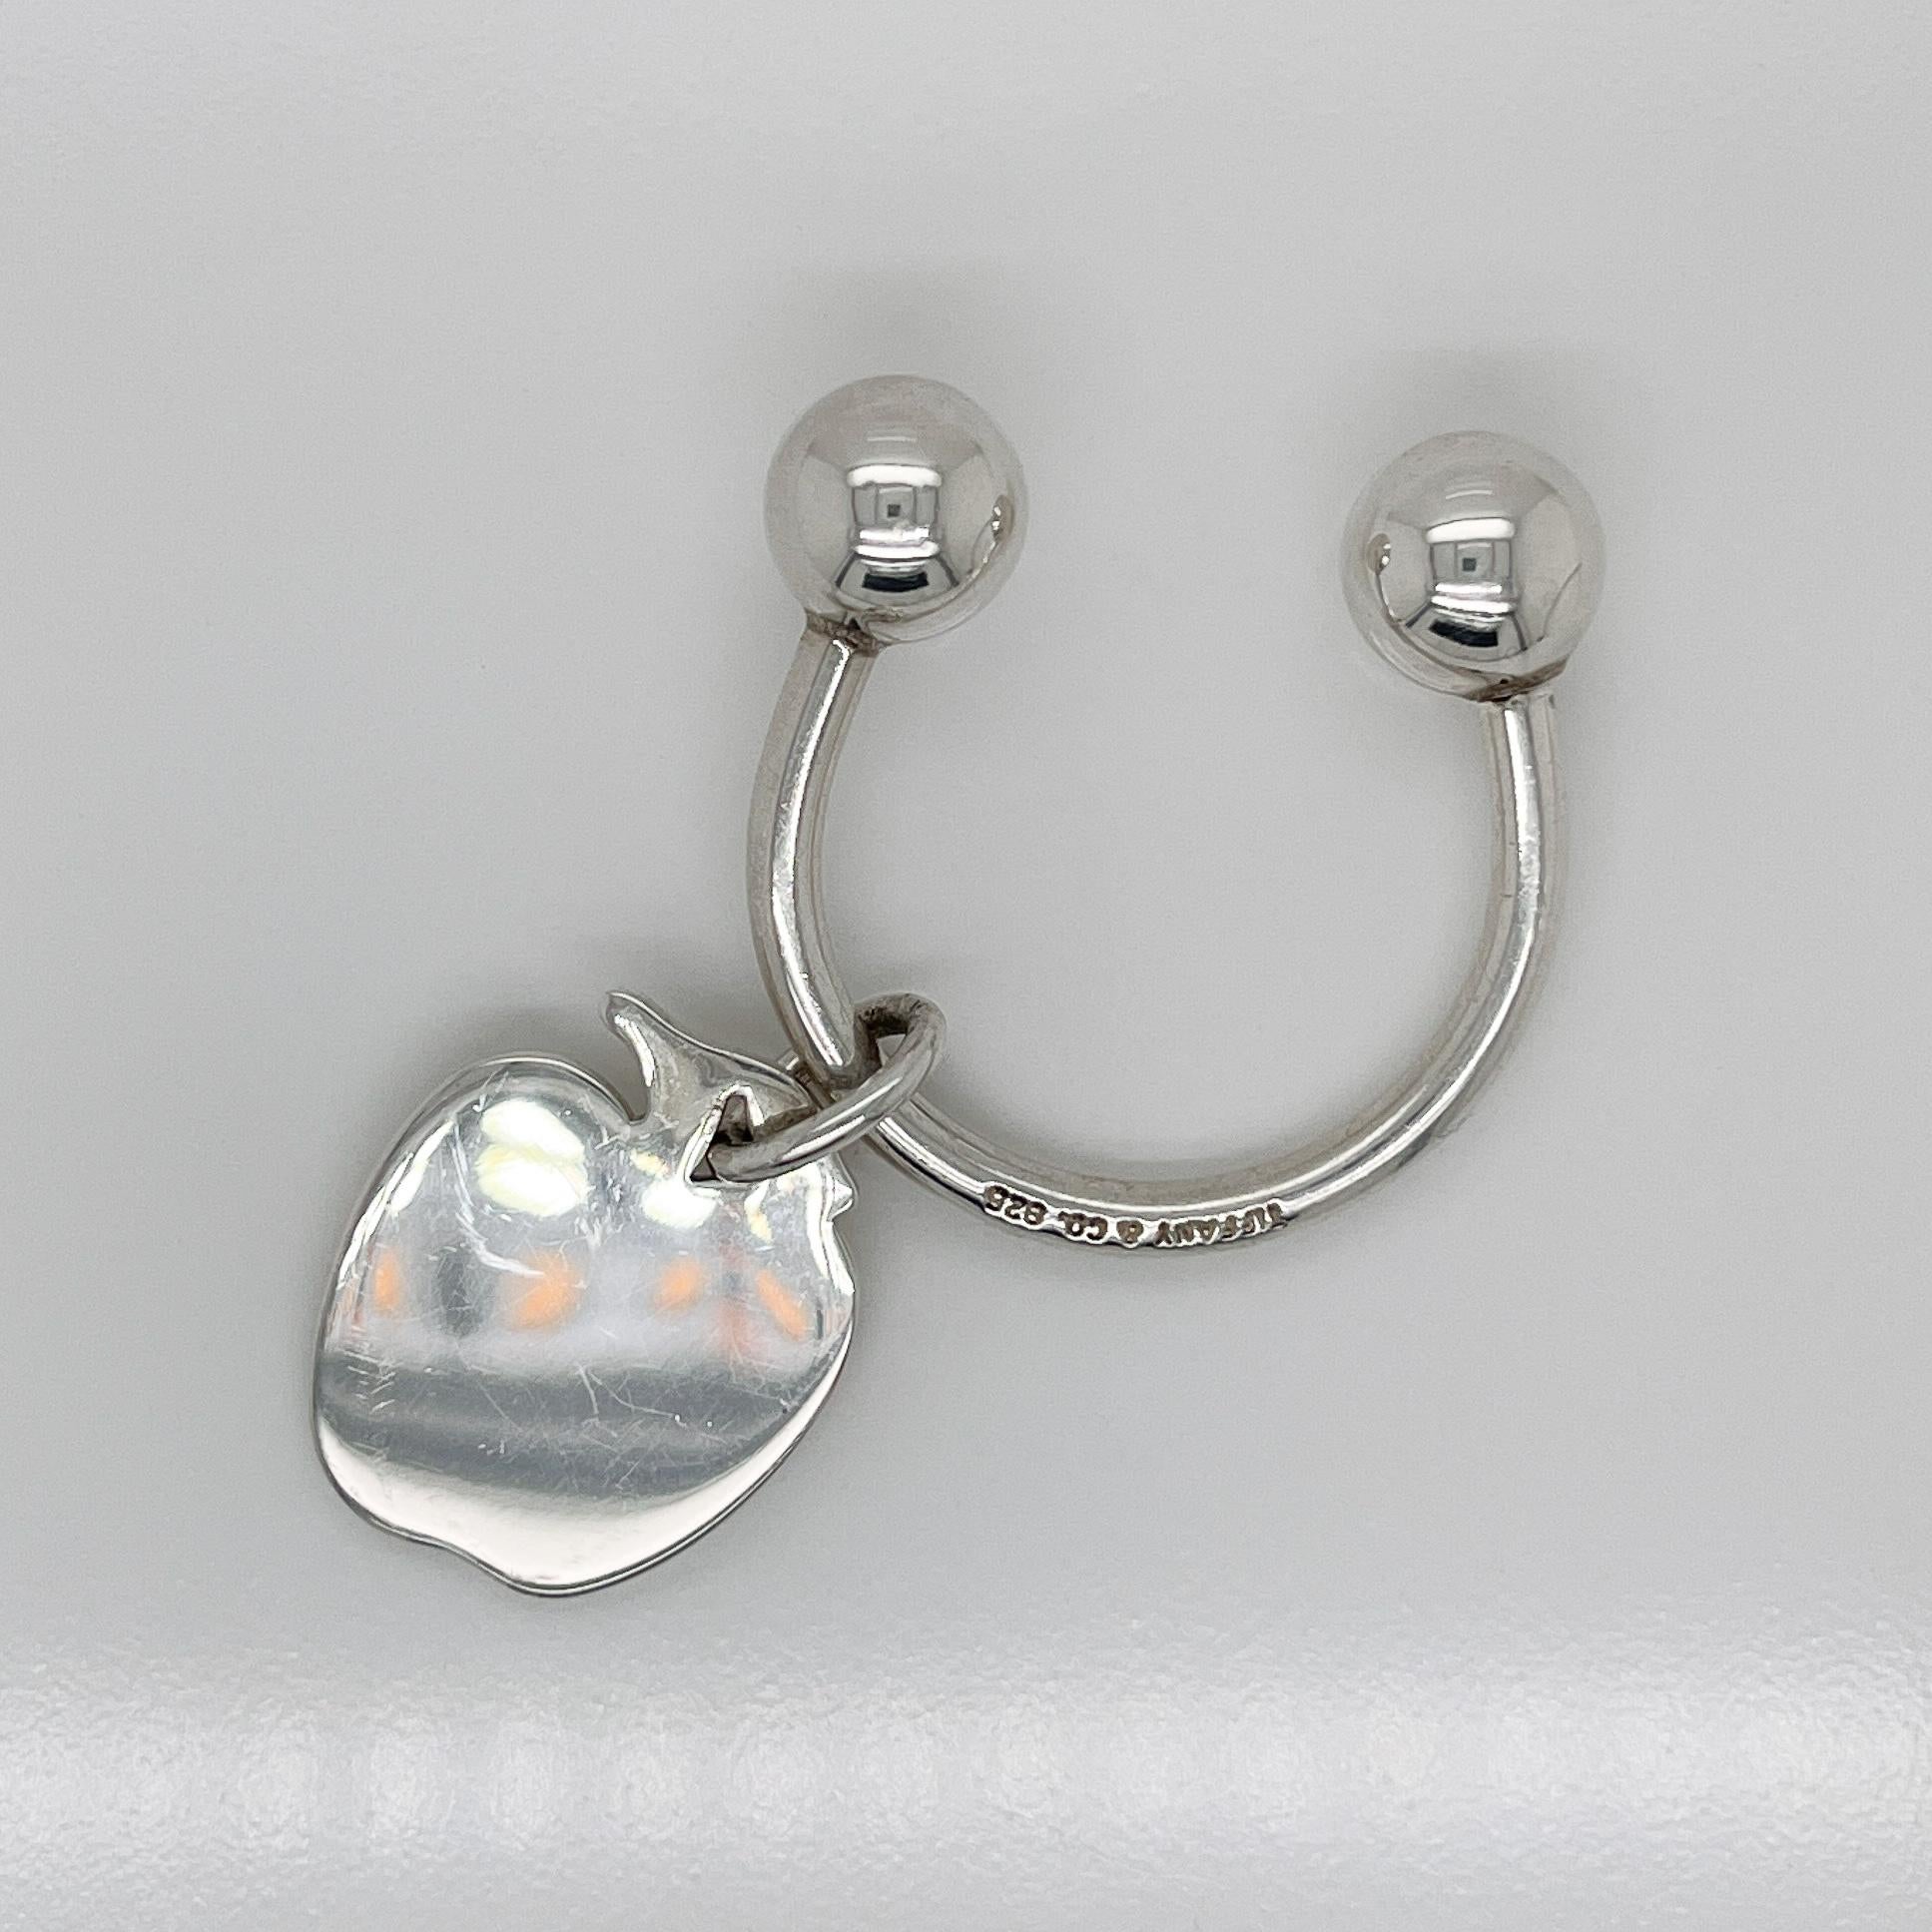 A very fine Tiffany and Co. key holder.

In sterling silver.

With an unengraved pendant tag in the shape of an apple.

A great everyday Tiffany piece!

Date:
20th Century

Overall Condition:
It is in overall good, as-pictured, used estate condition